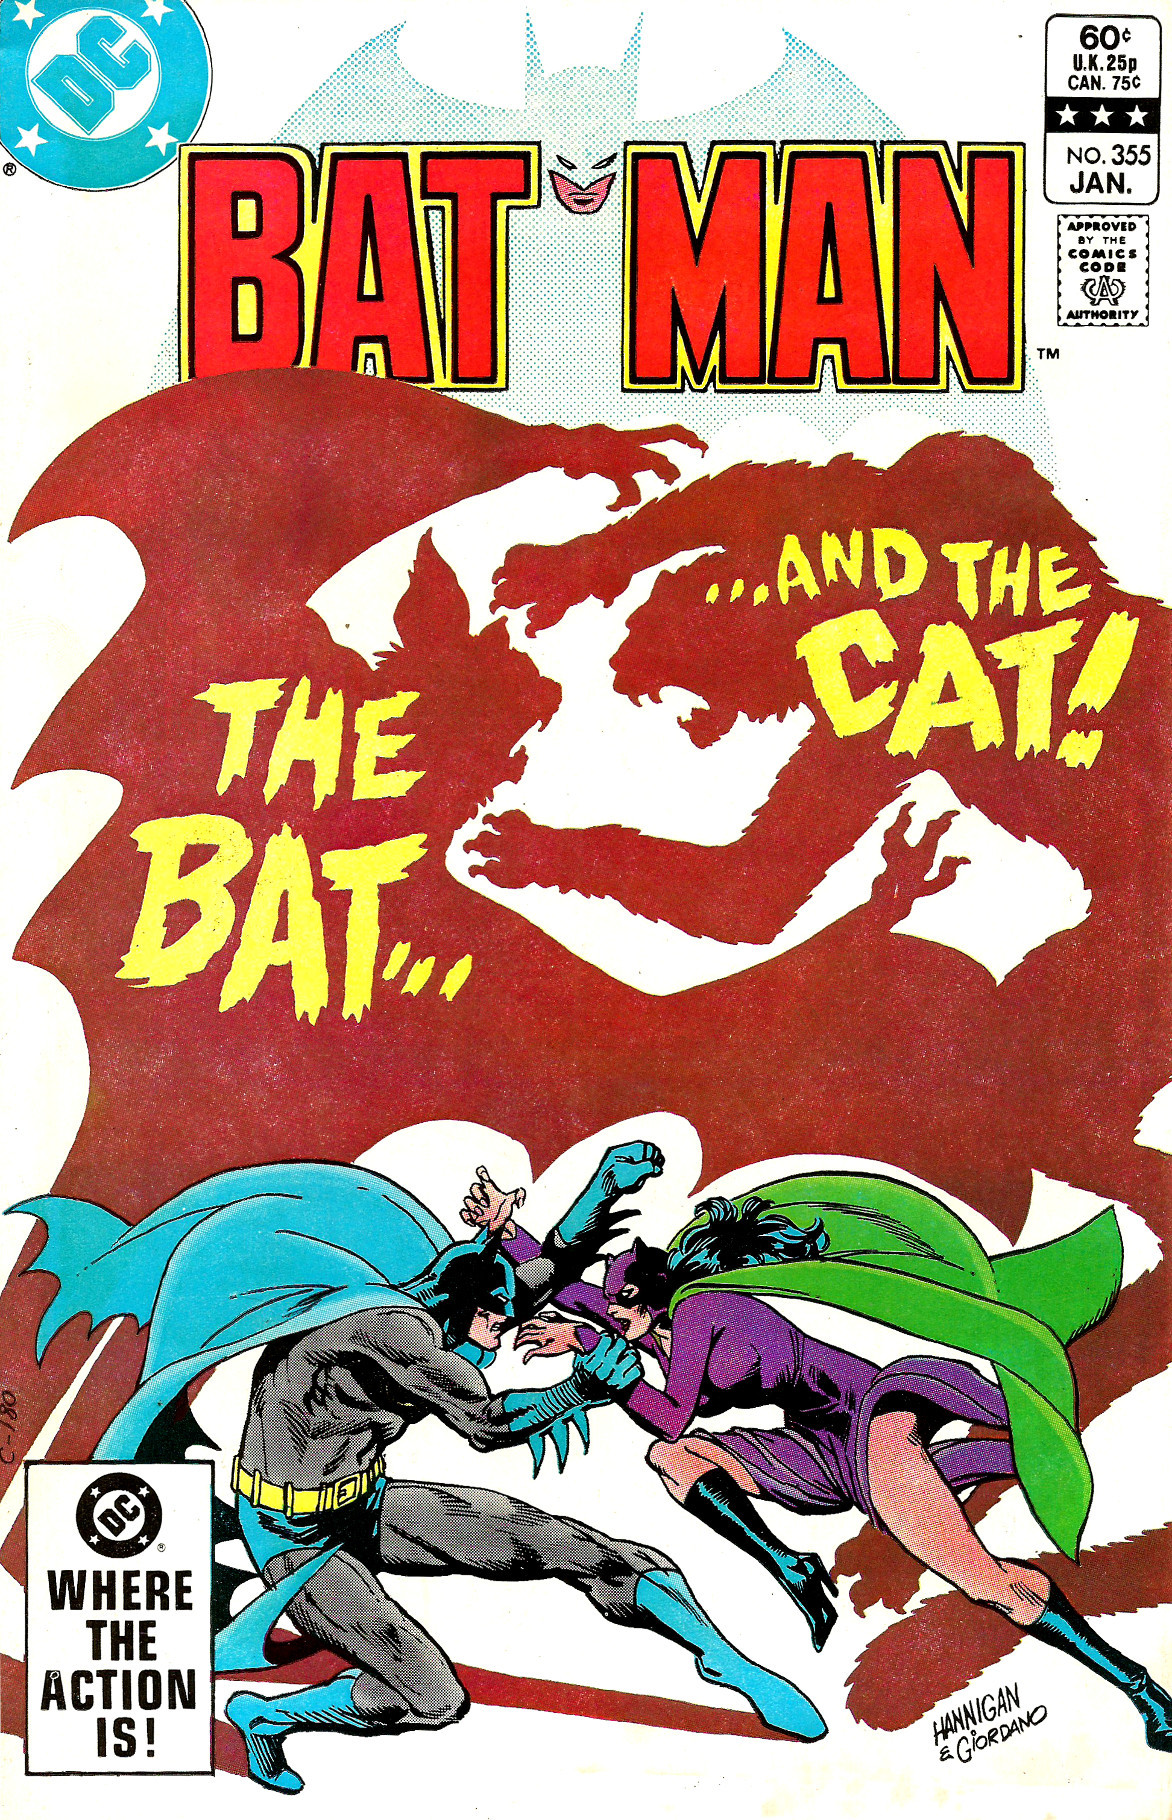 Batman, No. 355 (DC Comics, 1983). Cover art by Ed Hannigan and Dick Giordano. From